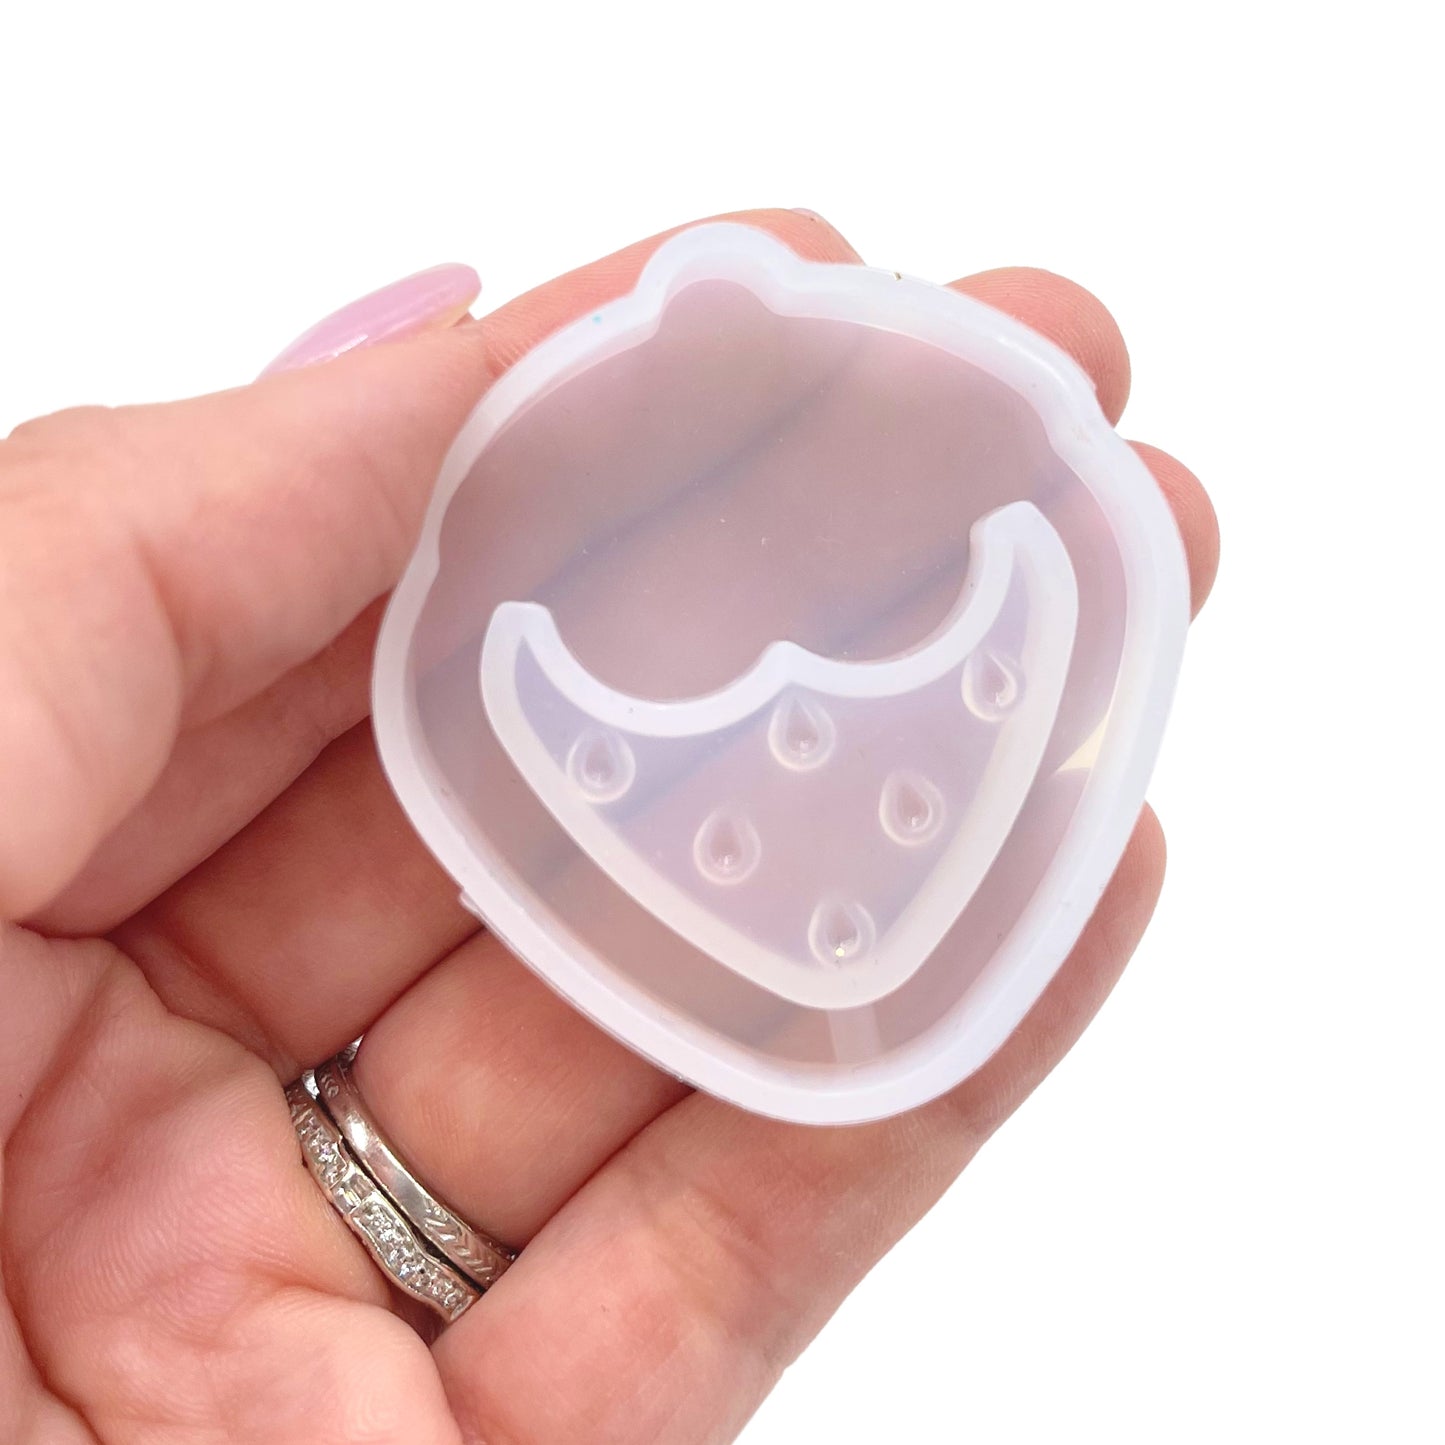 Shaker Silicone Mold or Cover | Choose Style